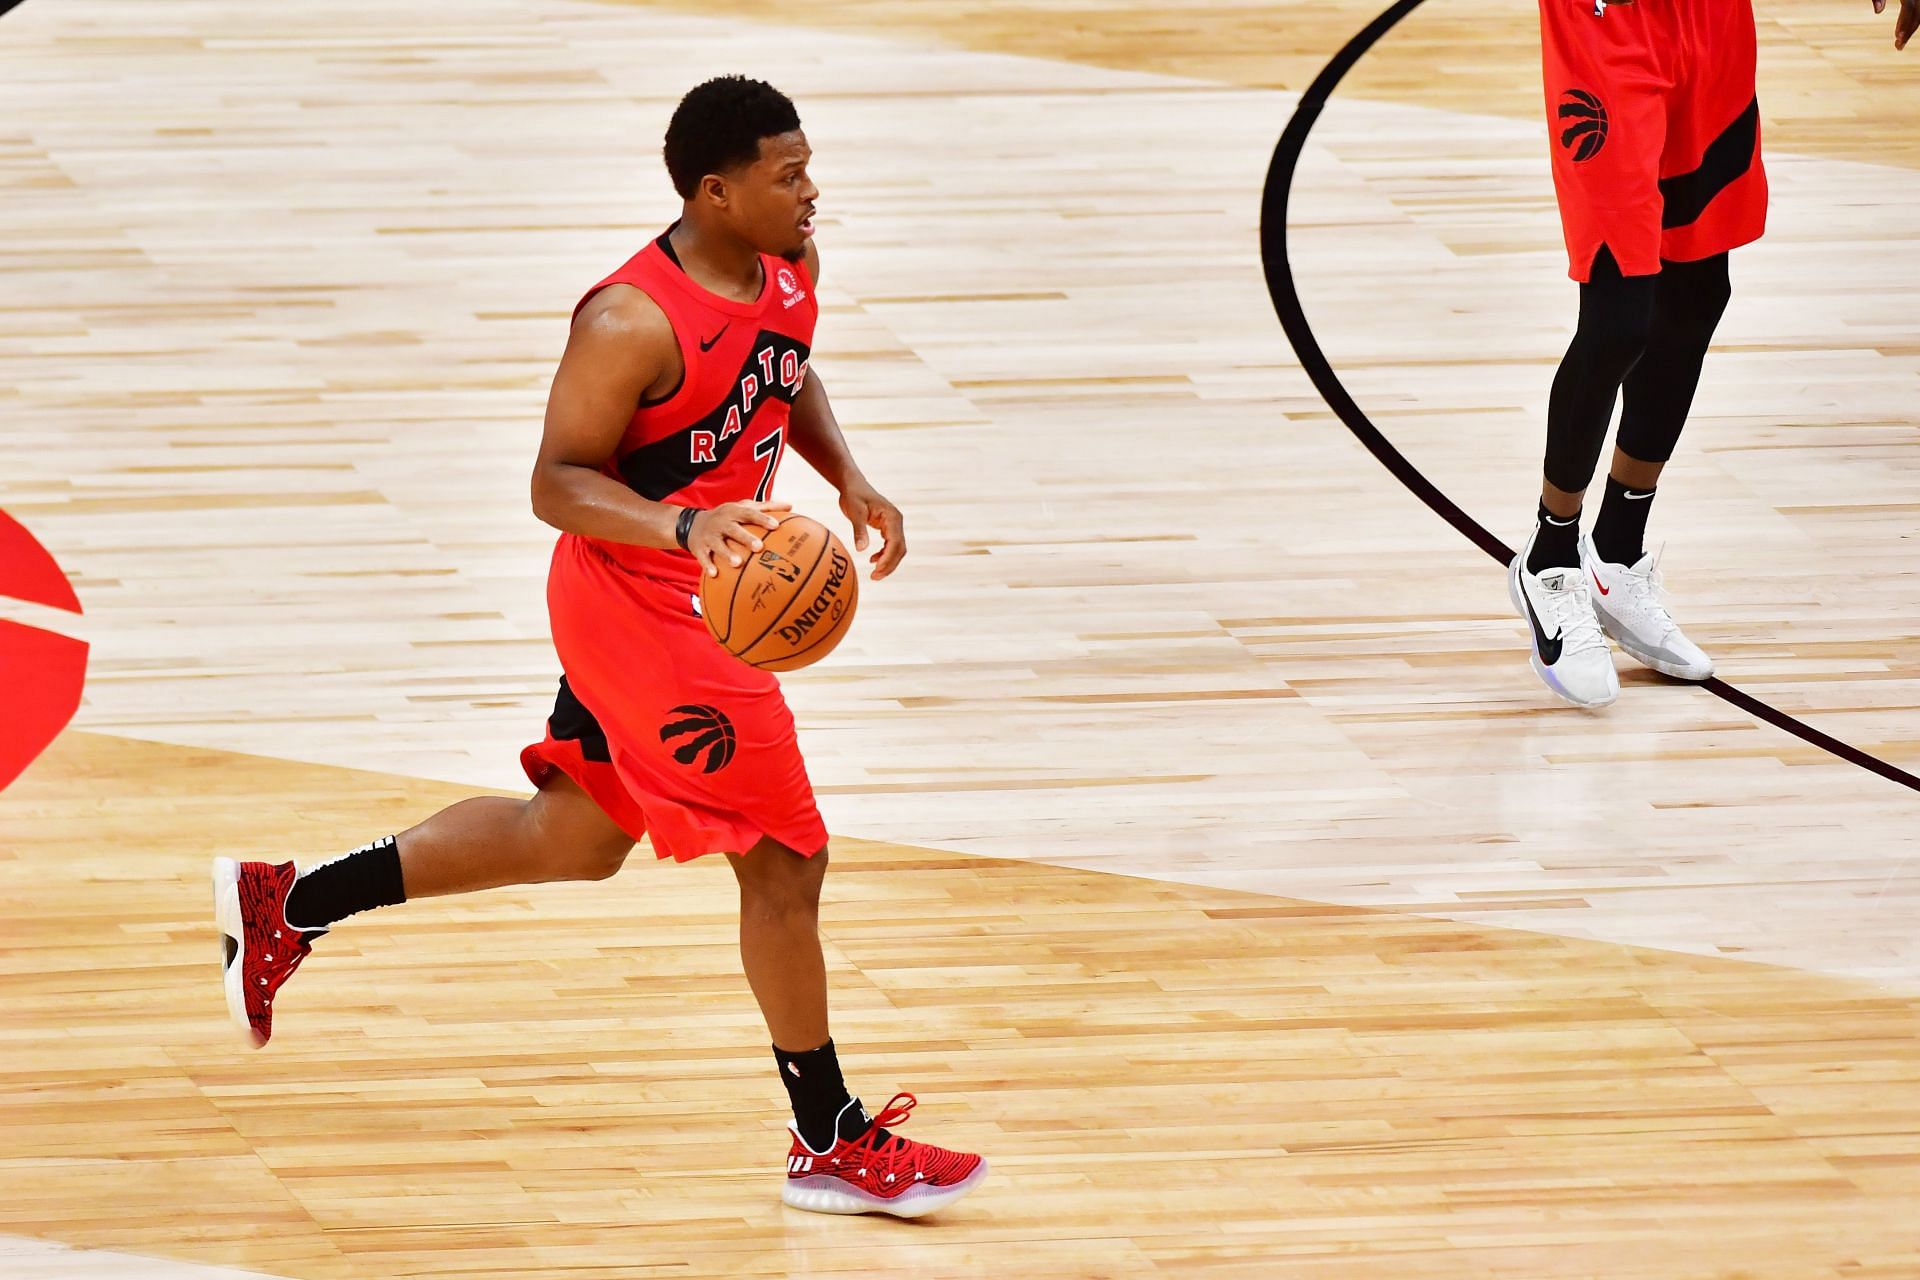 Kyle Lowry in action during the New York Knicks vs Toronto Raptors game